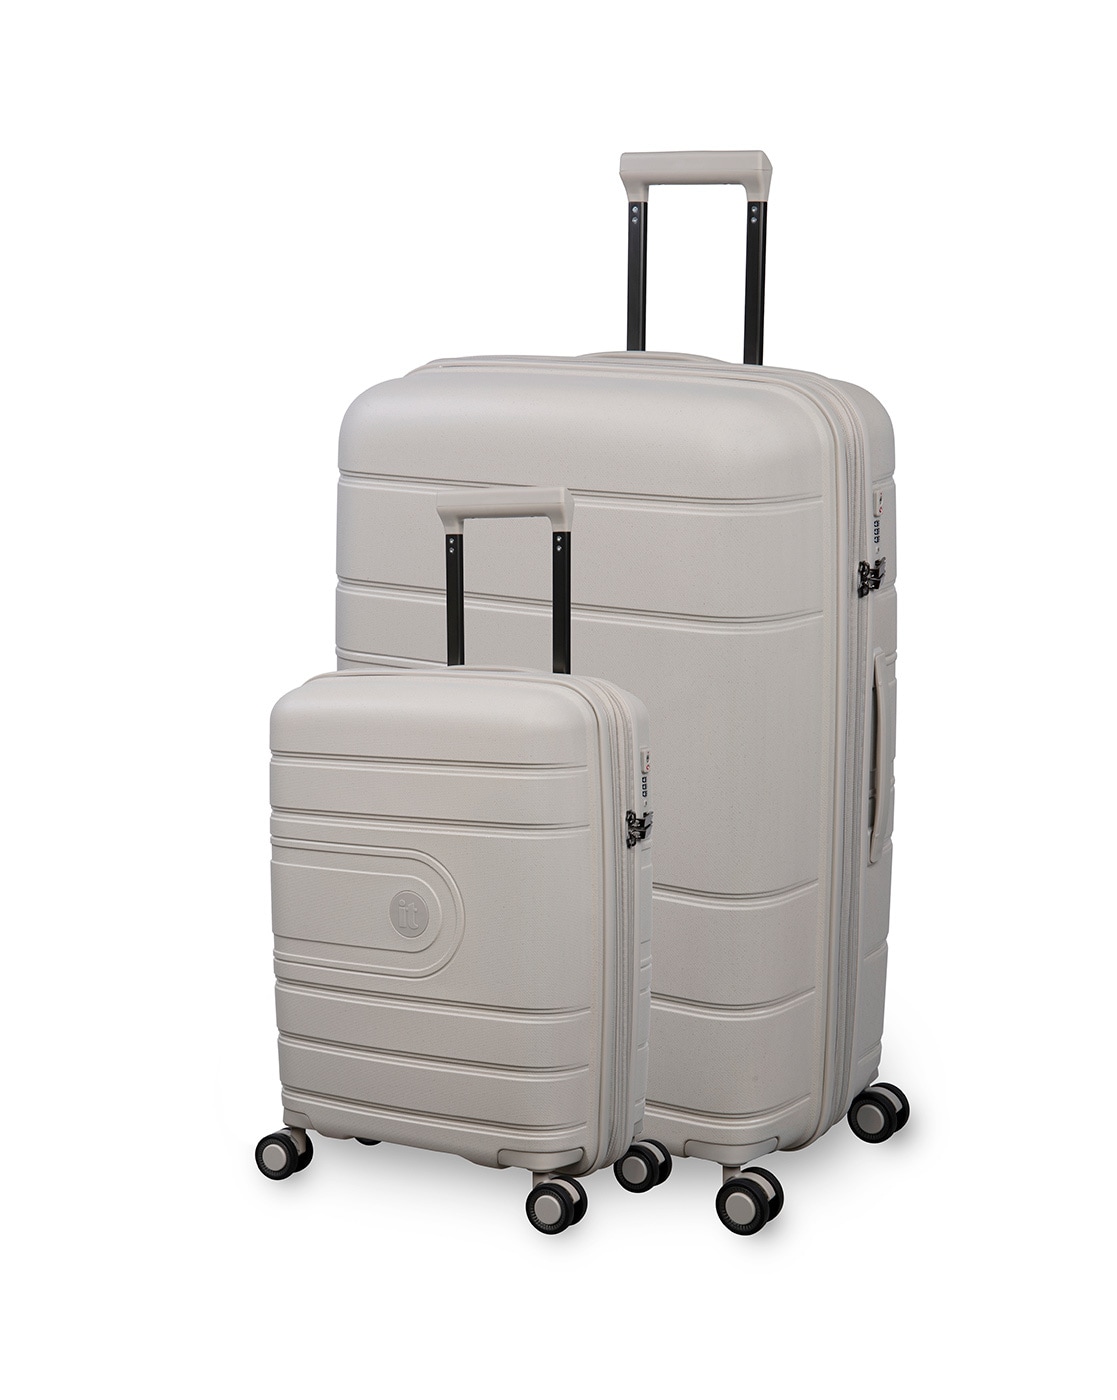 Buy Black Luggage  Trolley Bags for Men by National Geographic Online   Ajiocom